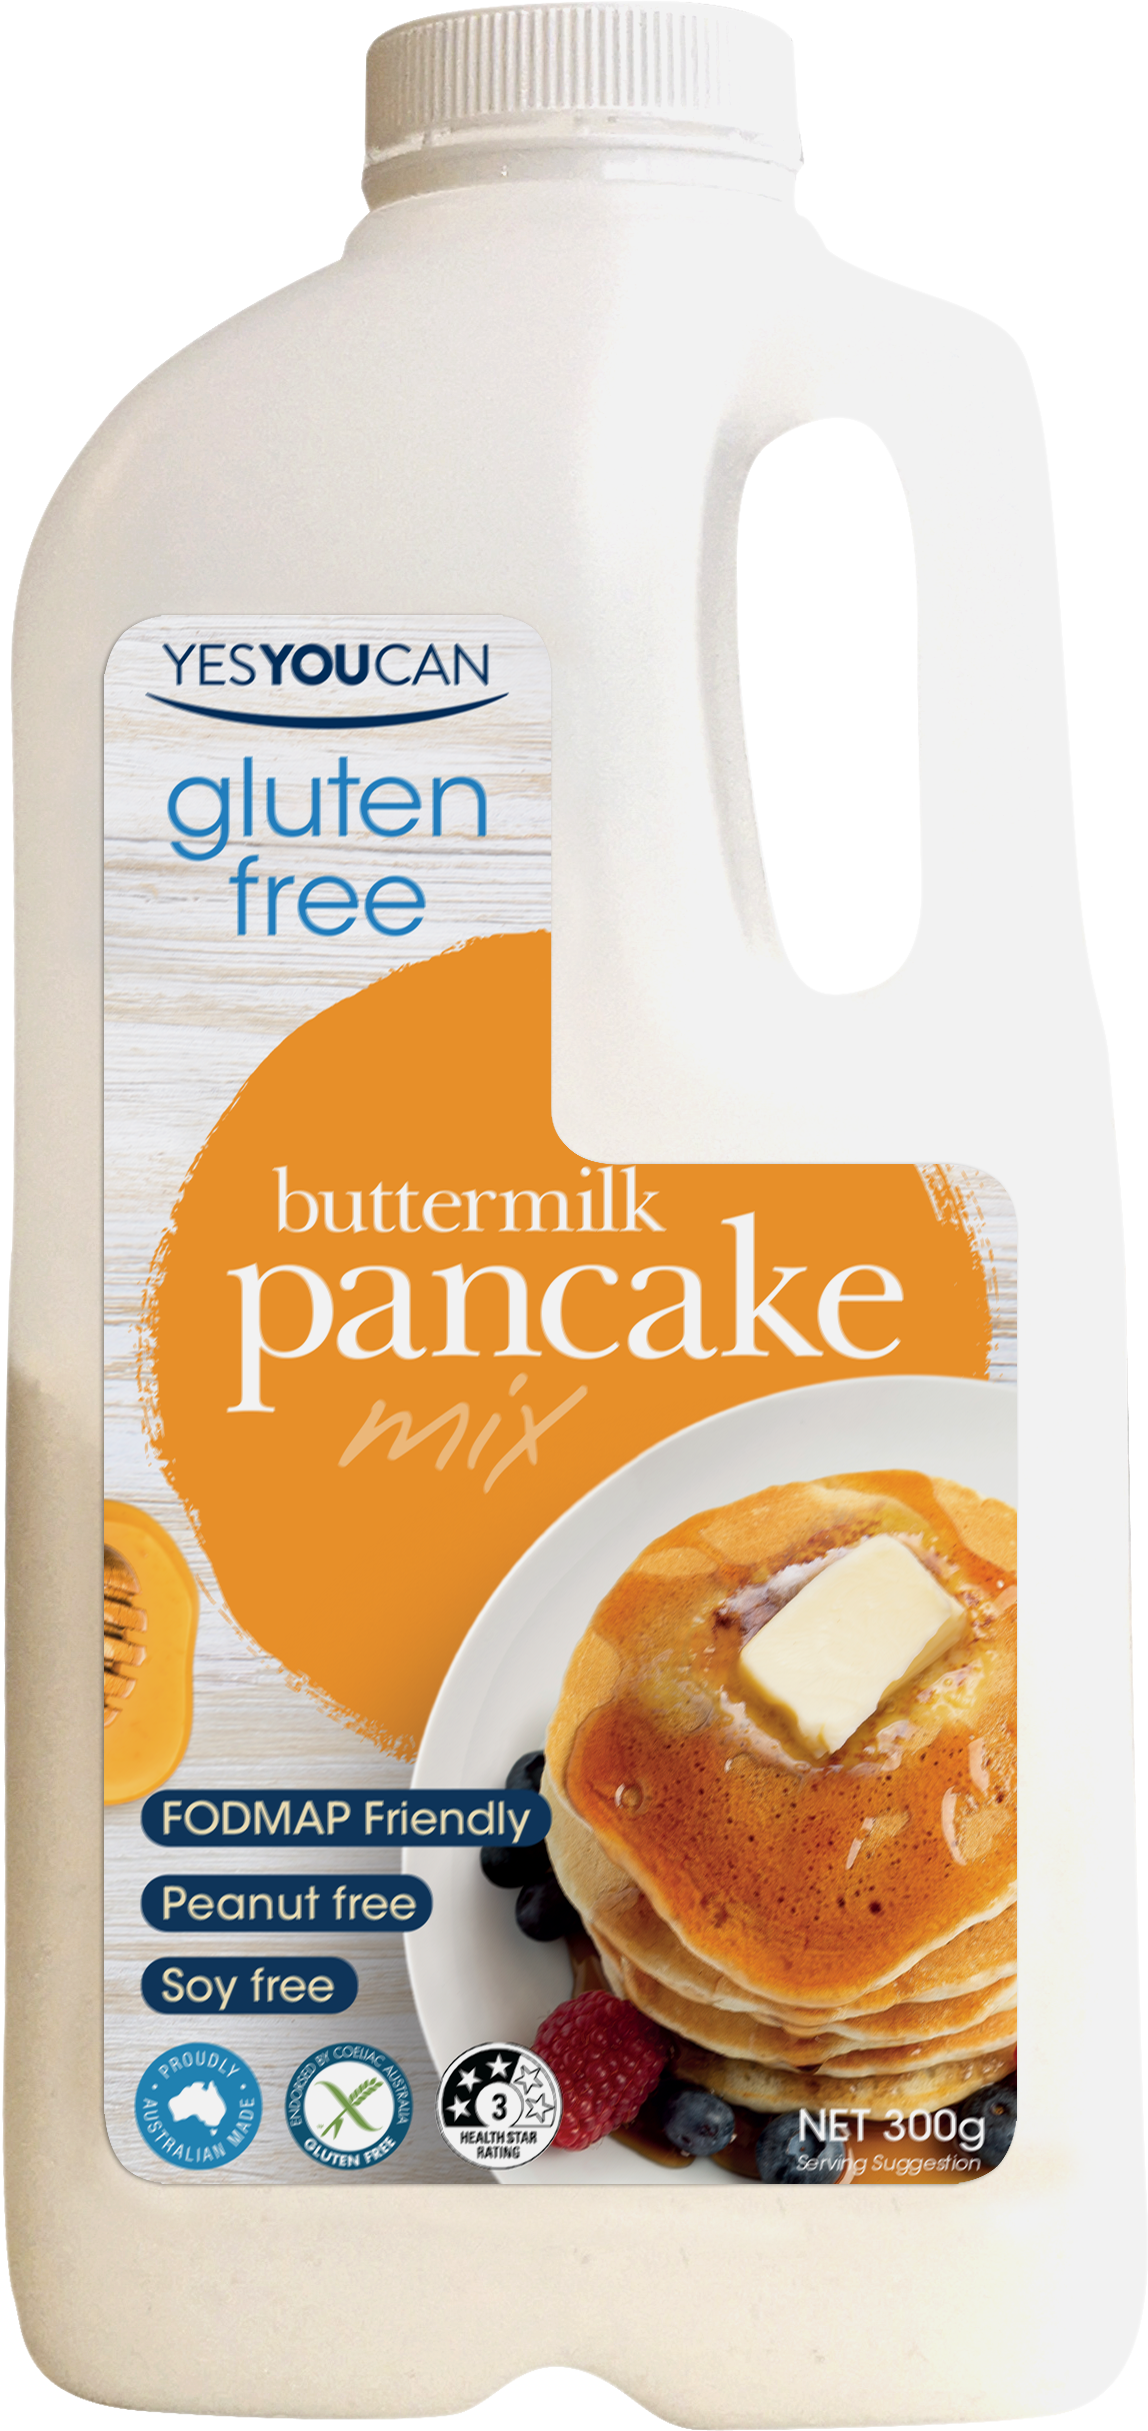  buttermilk pancake gluten free yesyoucan front image product photo